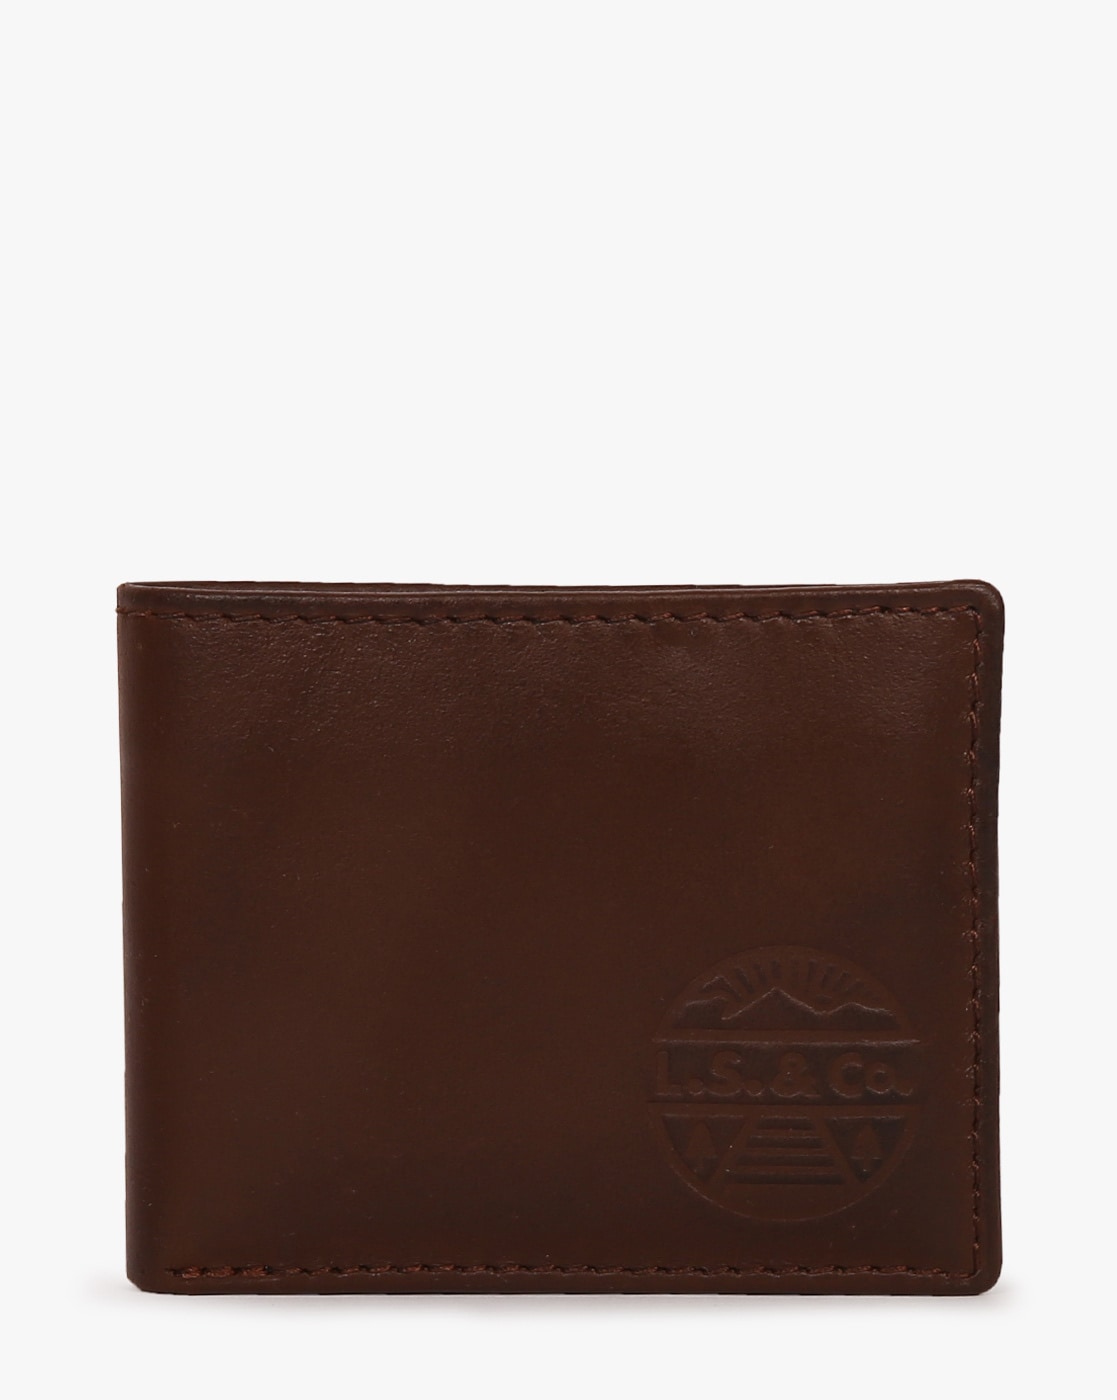 Accessories | LEVI'S WALLET | Freeup